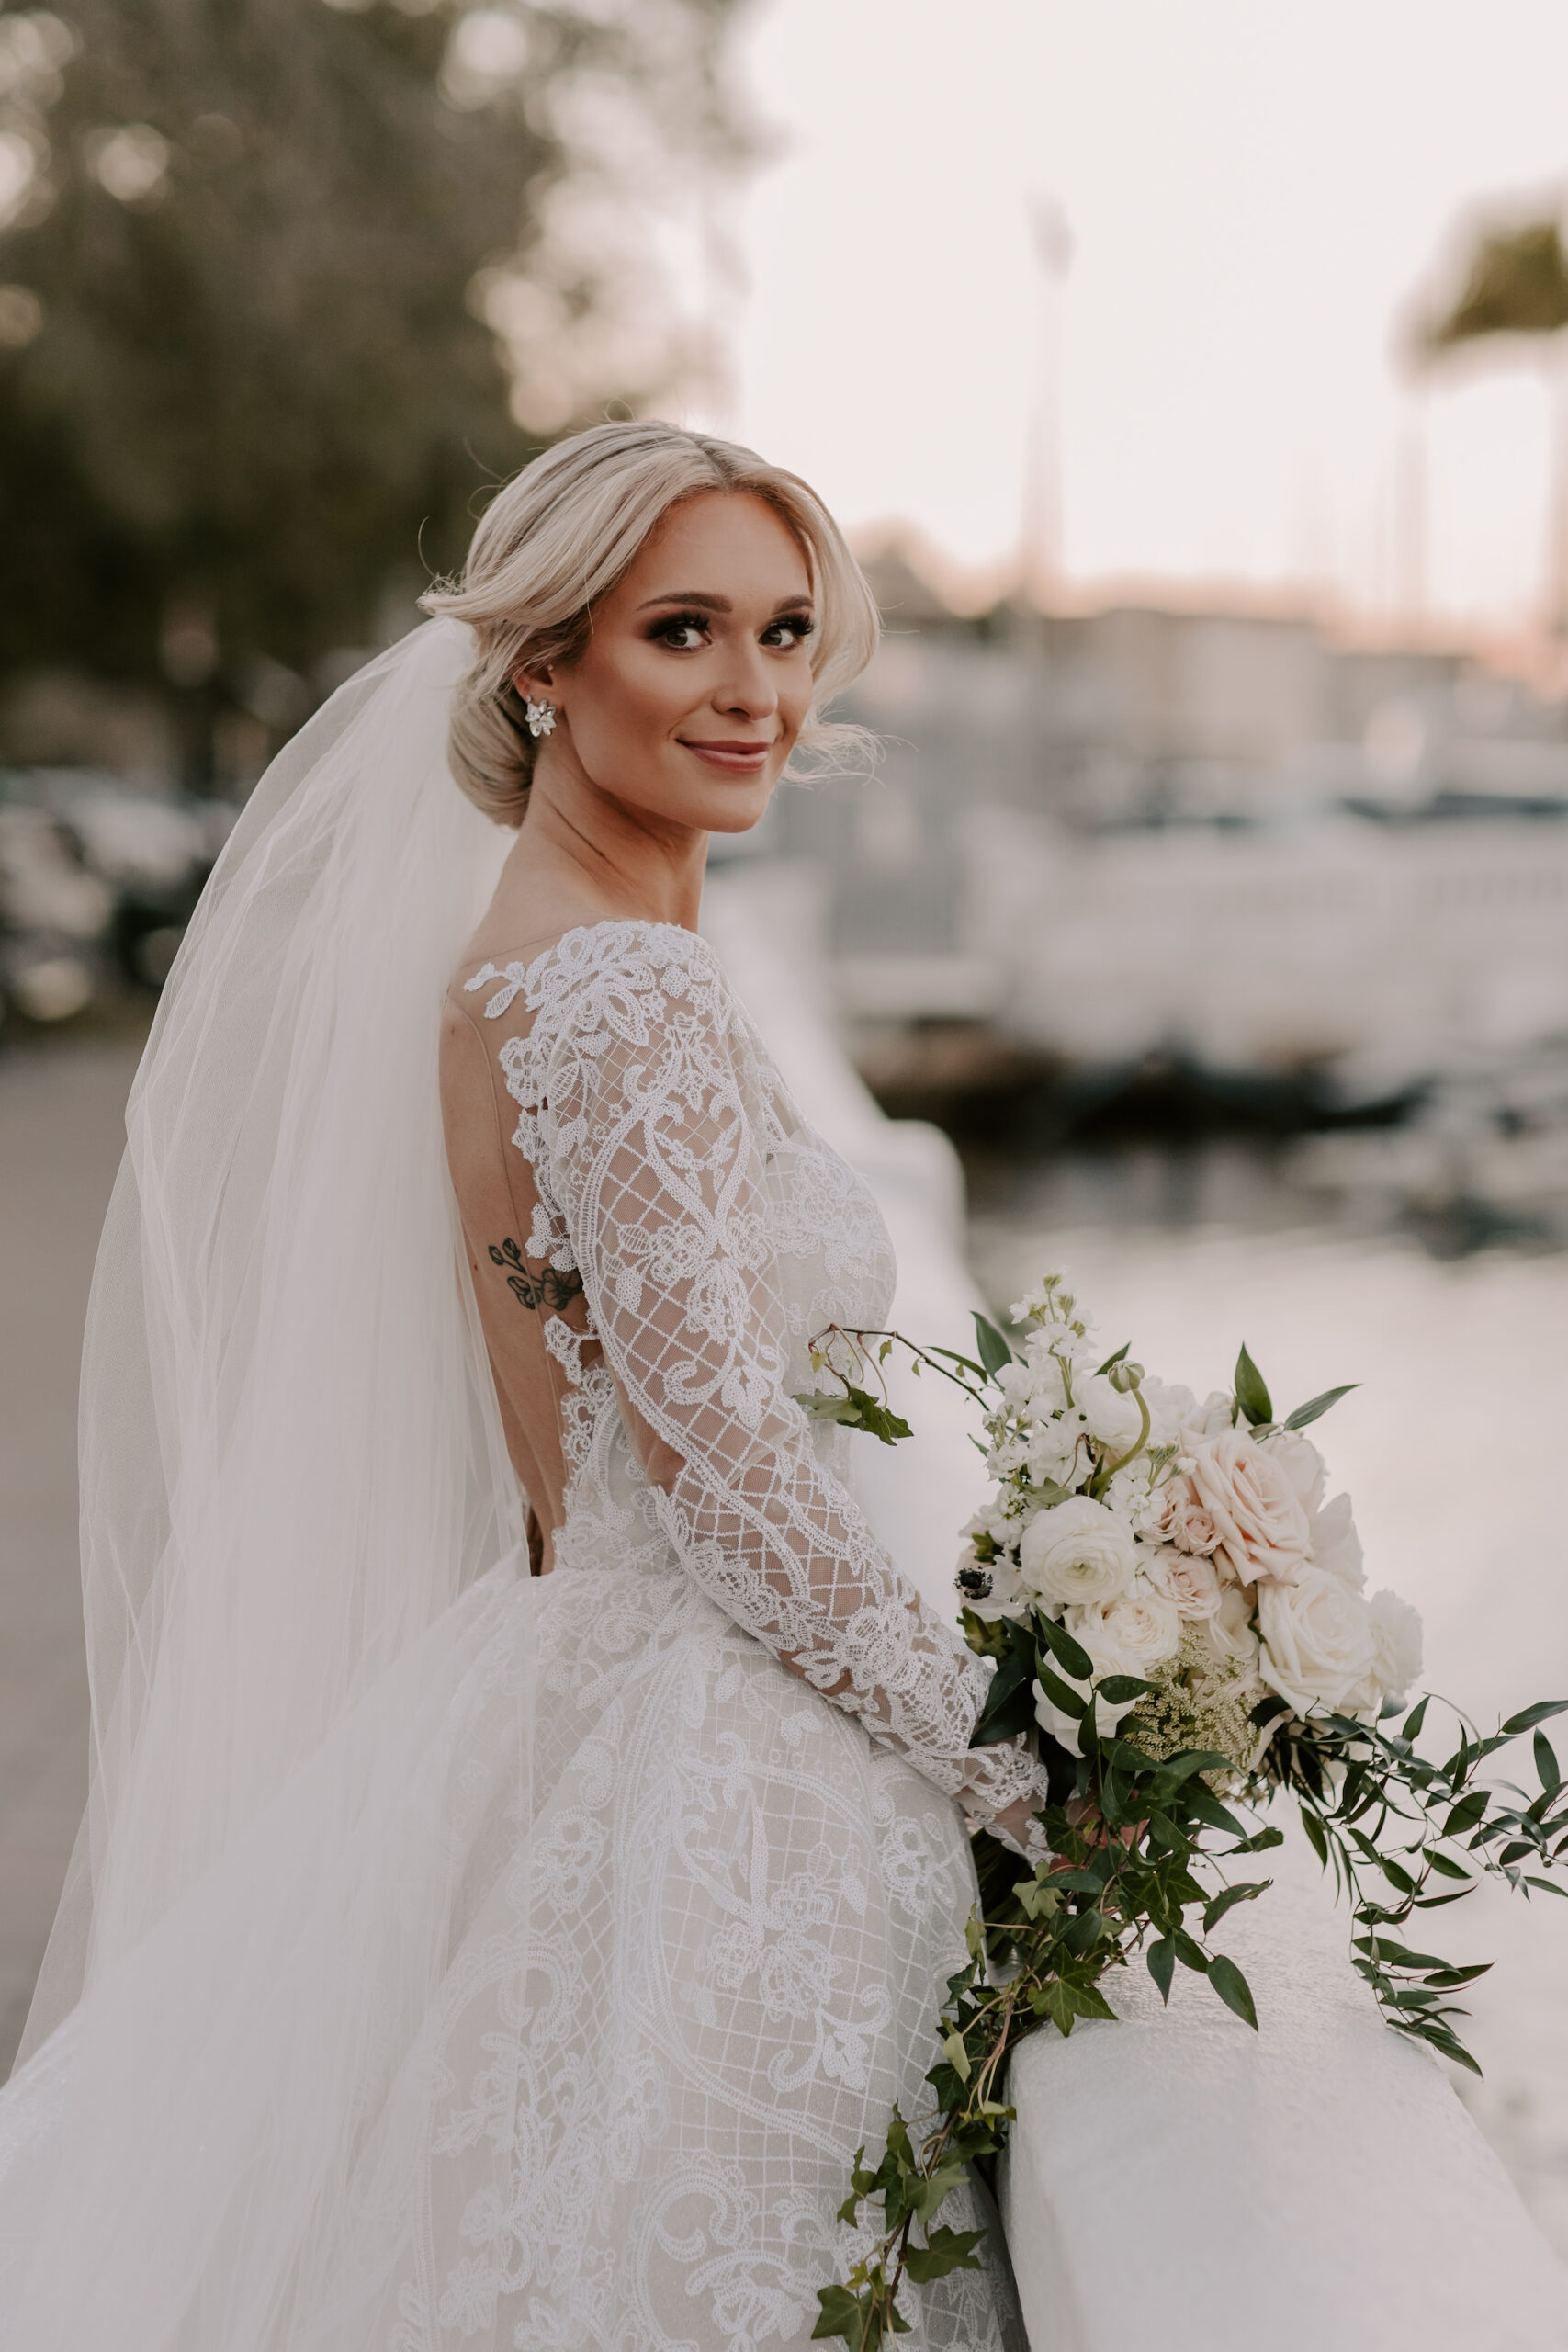 Classic Bridal Hair and Makeup Inspiration | Ivory Champagne Embroidered A-line Deep V-Neckline Sheer Long Sleeve Keyhole Back Applique Chapel Train Hailey Paige Dalton Wedding Dress